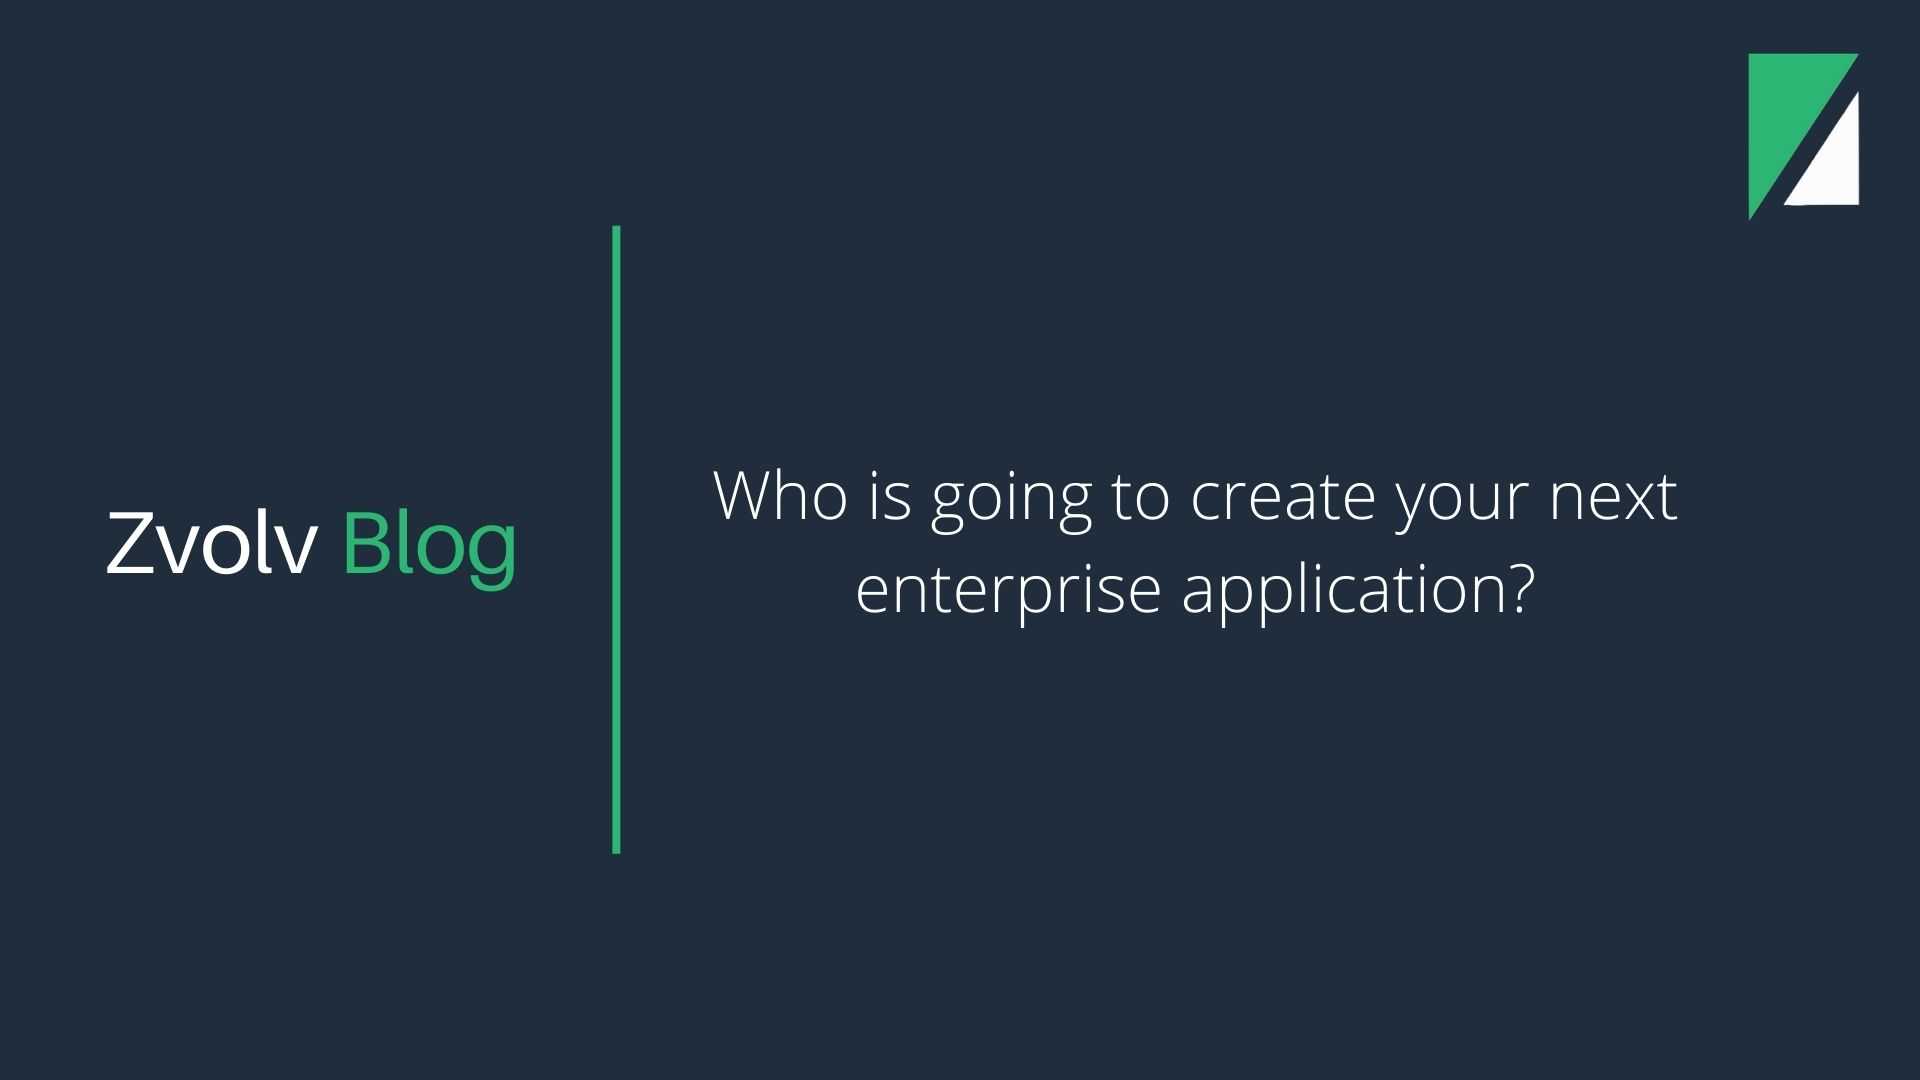 Who is going to create your next enterprise application?